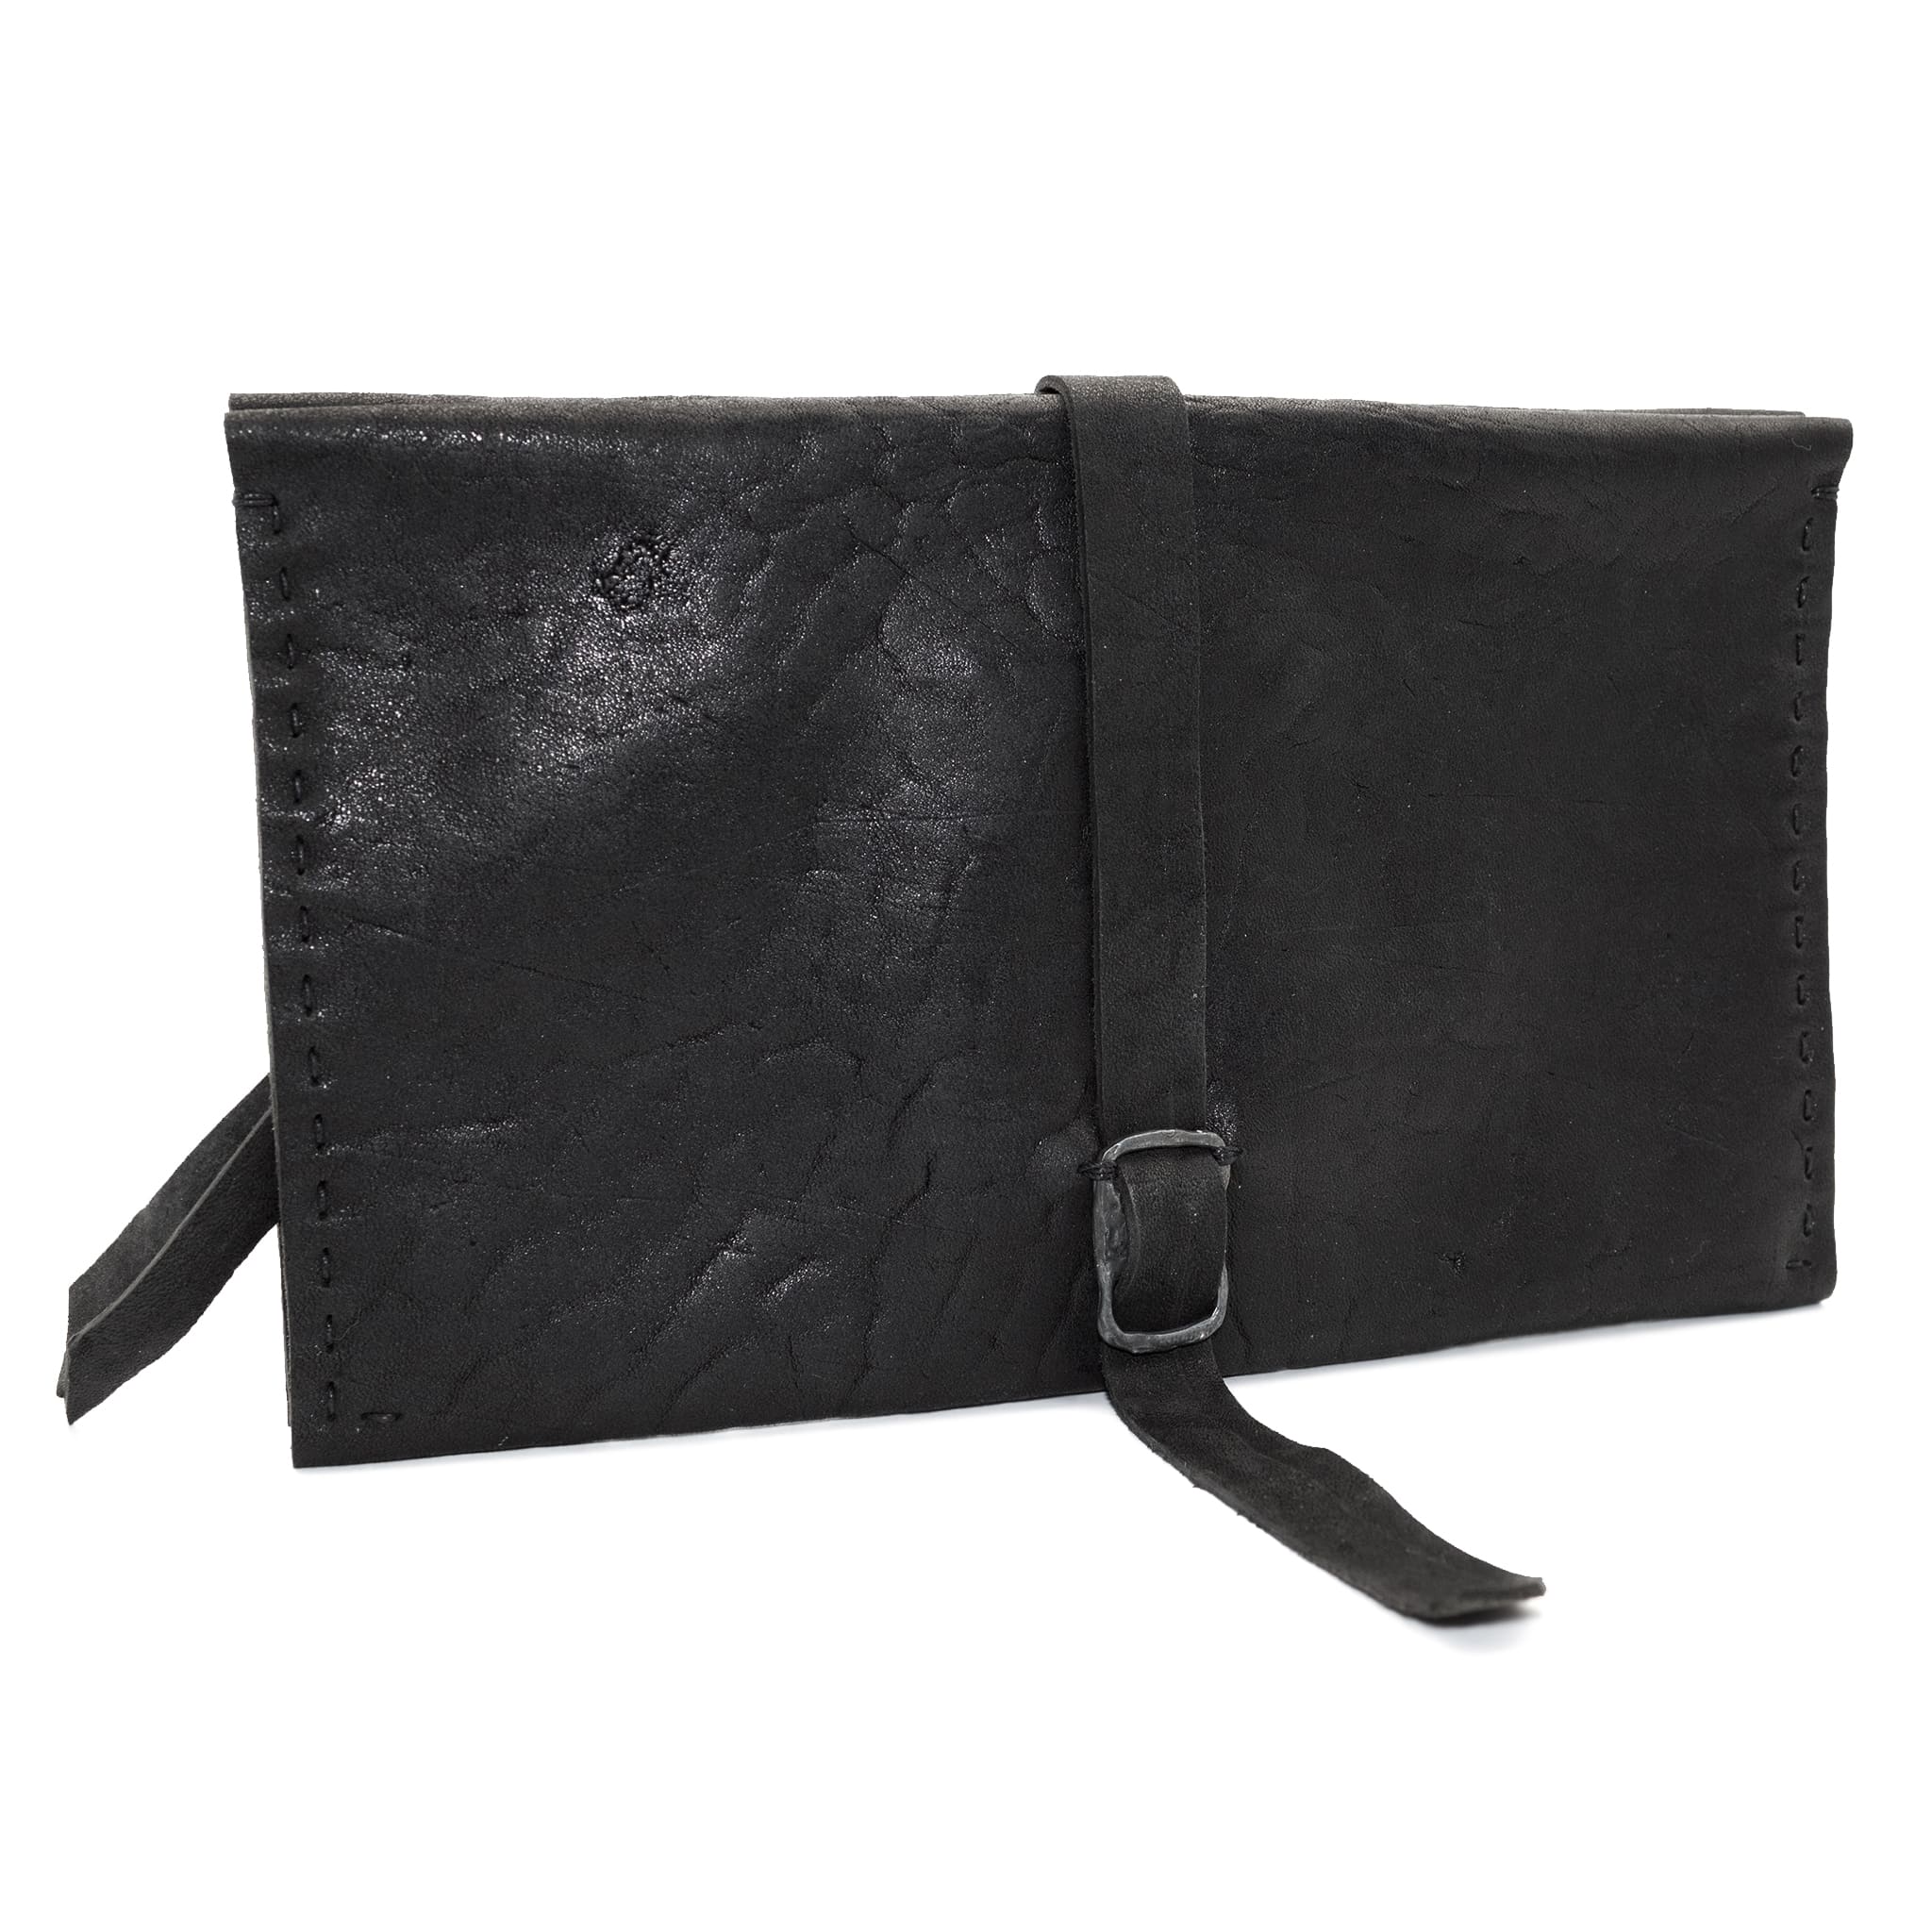 avant garde hand sewn black culatta leather bifold long wallet available online at atelierskn.com